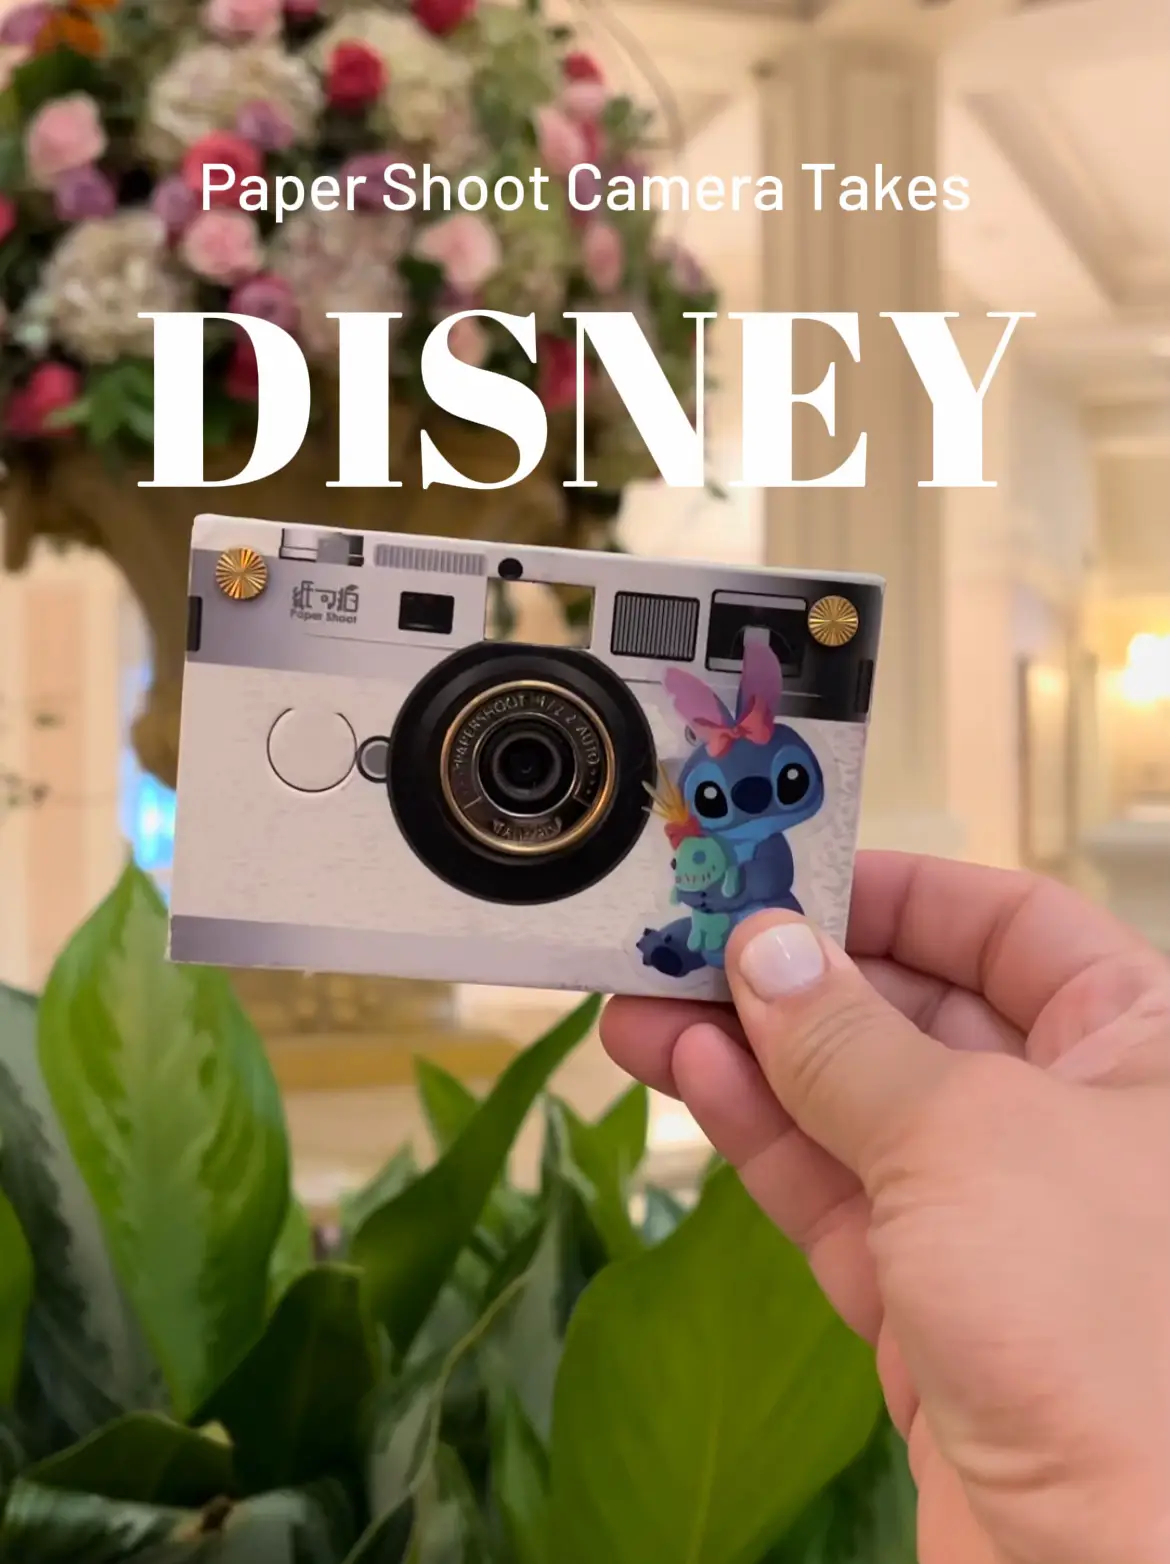 When you wish upon a star: Disney-themed Fujifilm X100V unveiled